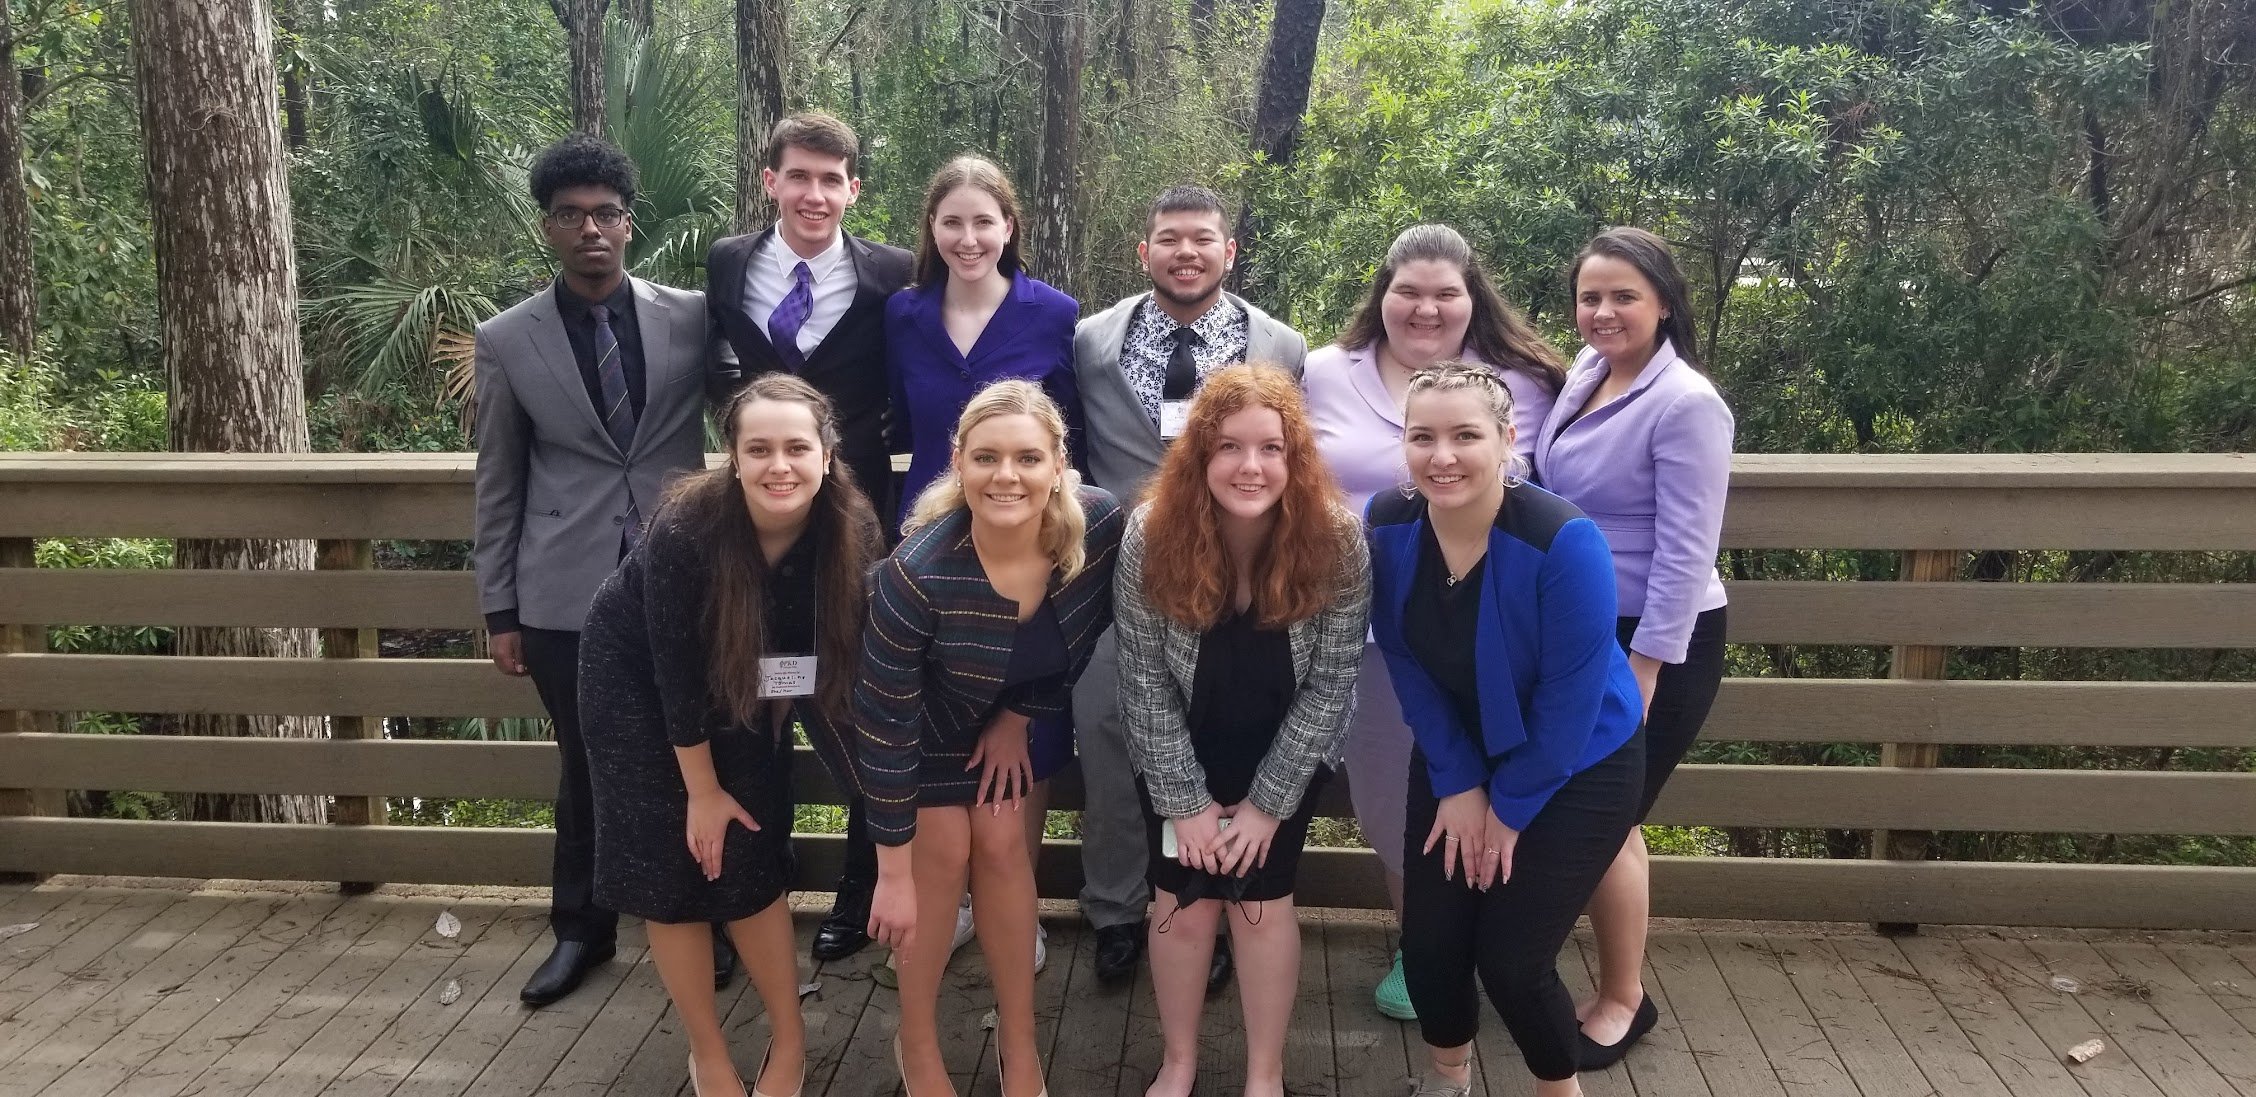 Minnesota State University speech and debate team gathered together for a picture outside on a bridge